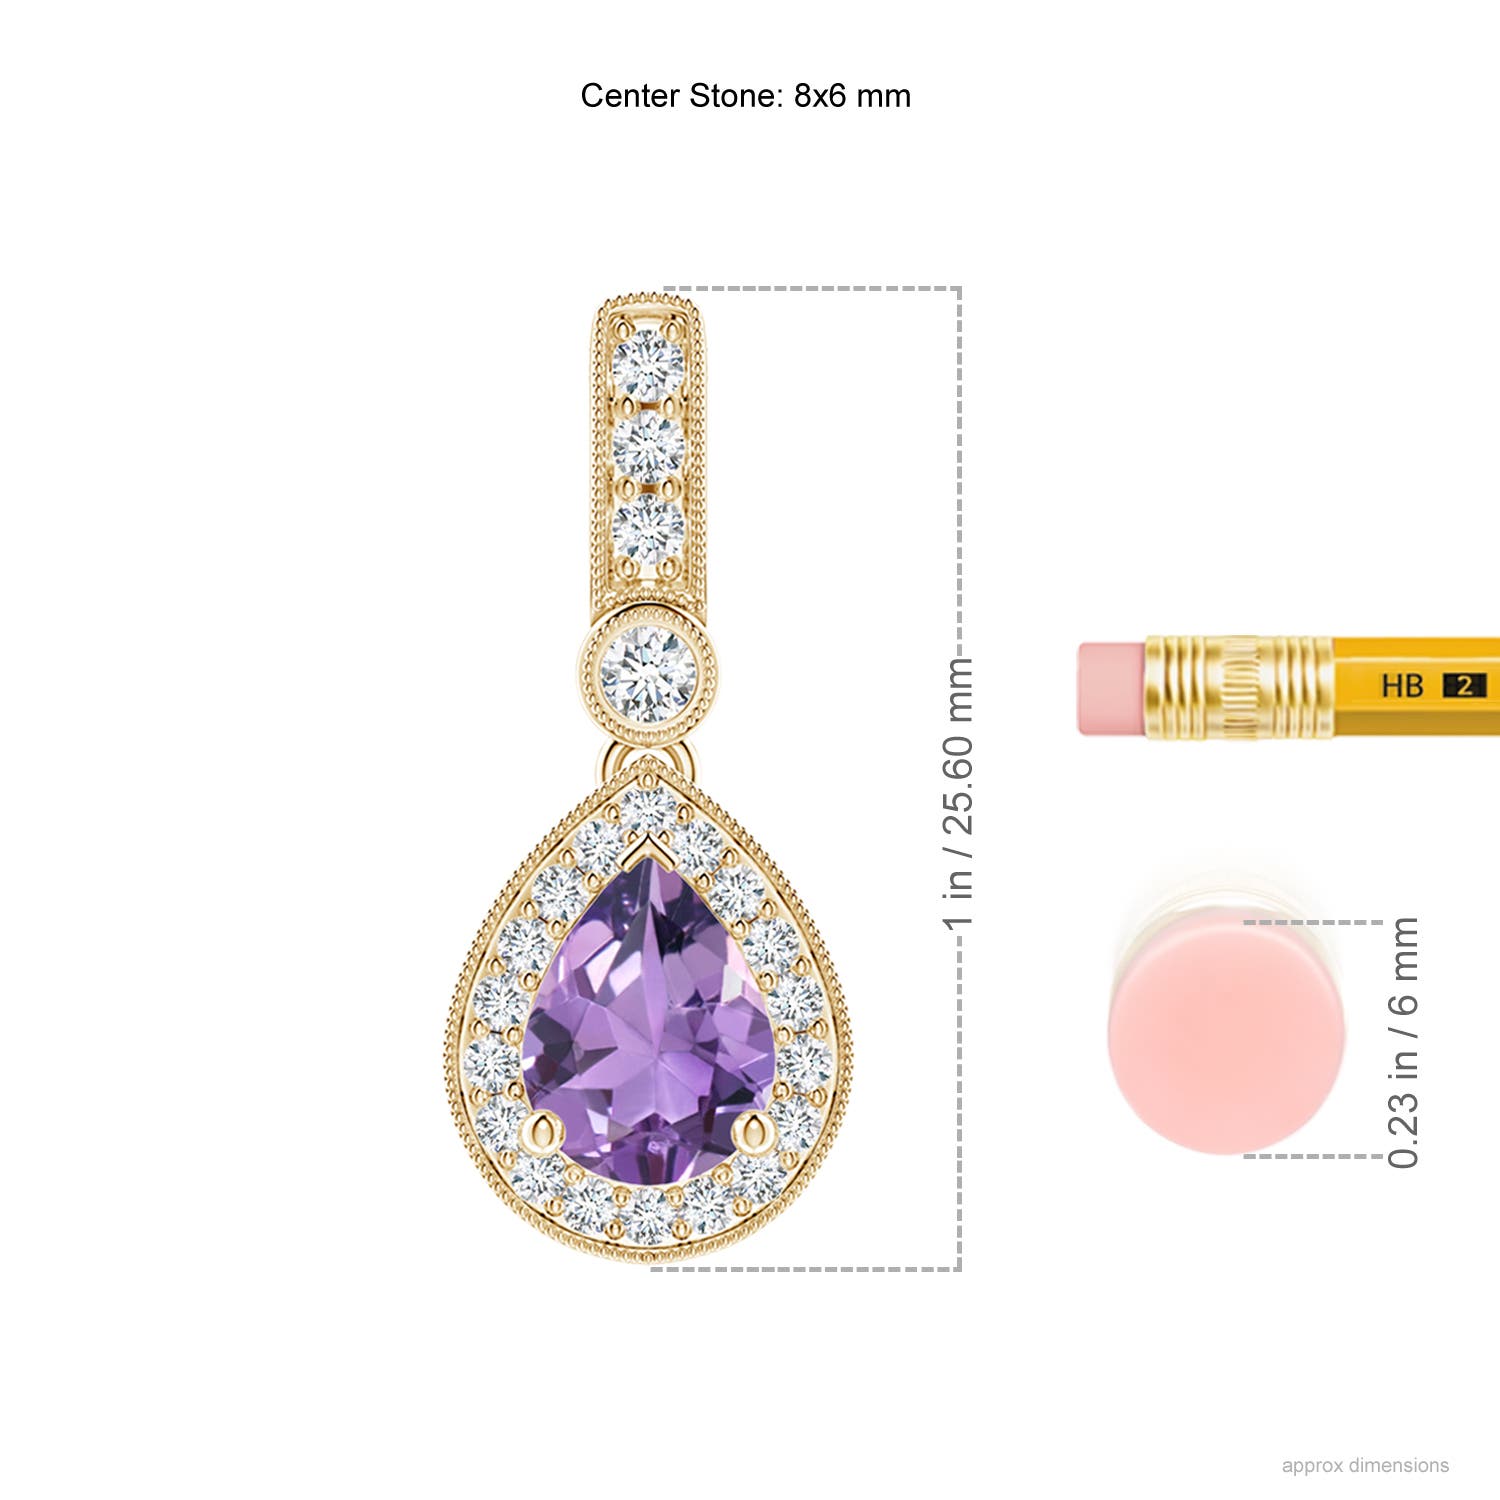 A - Amethyst / 1.31 CT / 14 KT Yellow Gold